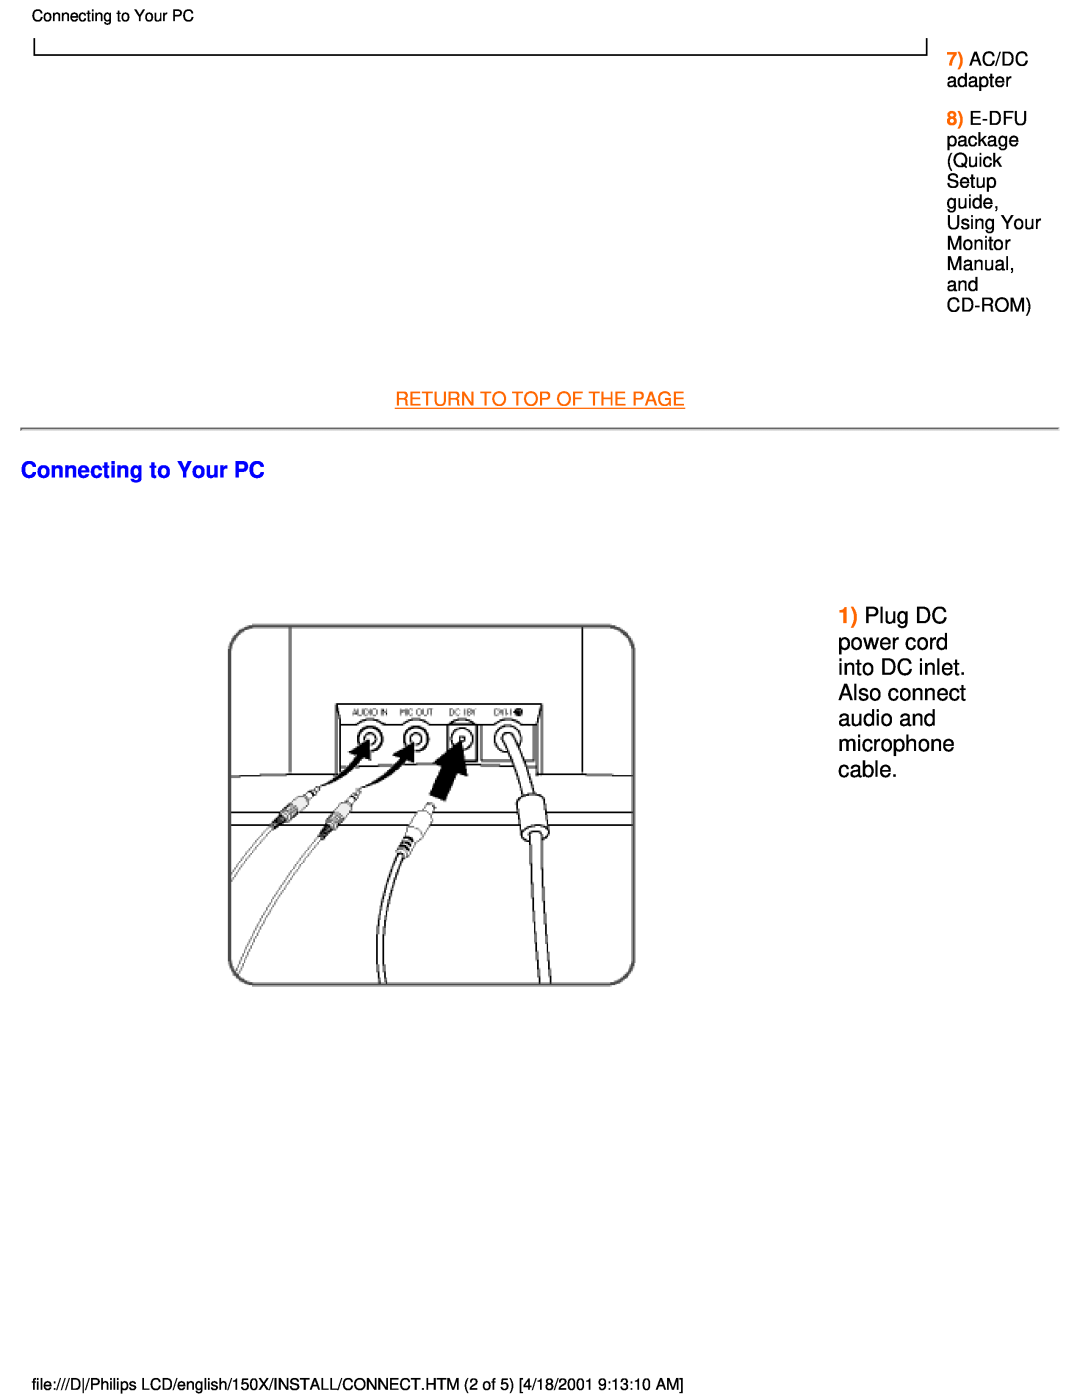 Philips 150X user manual Connecting to Your PC, 7 AC/DC adapter, Return To Top Of The Page 